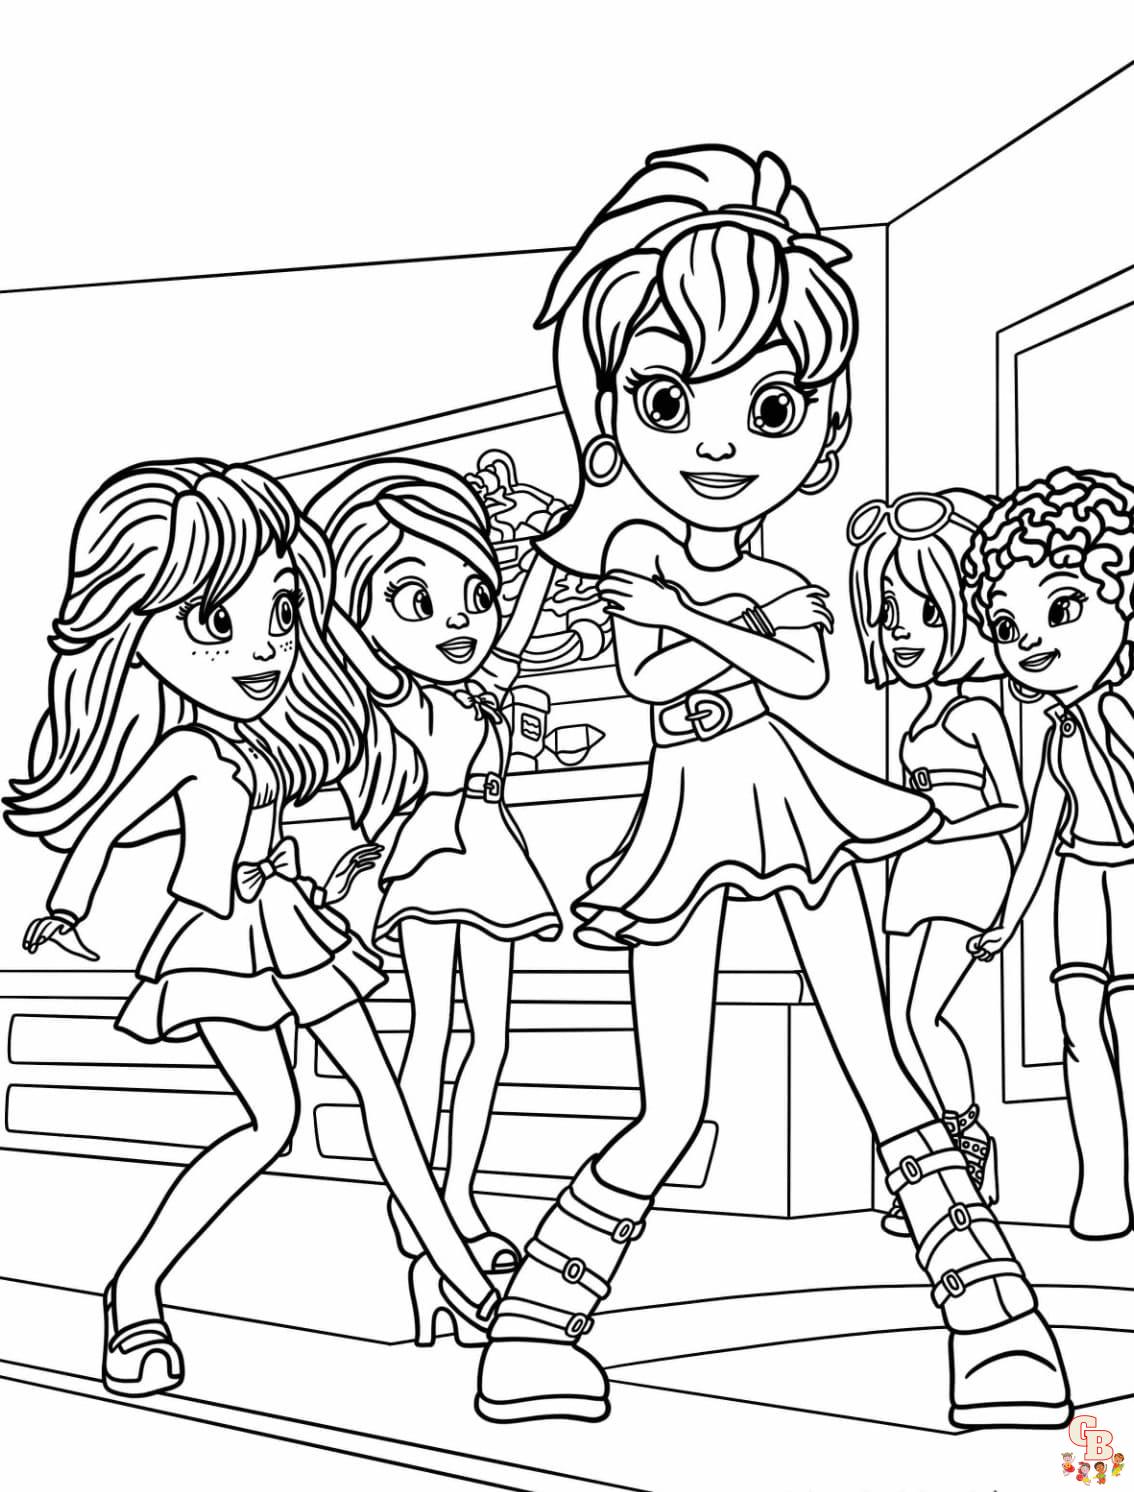 Printable polly pocket coloring pages free for kids and adults